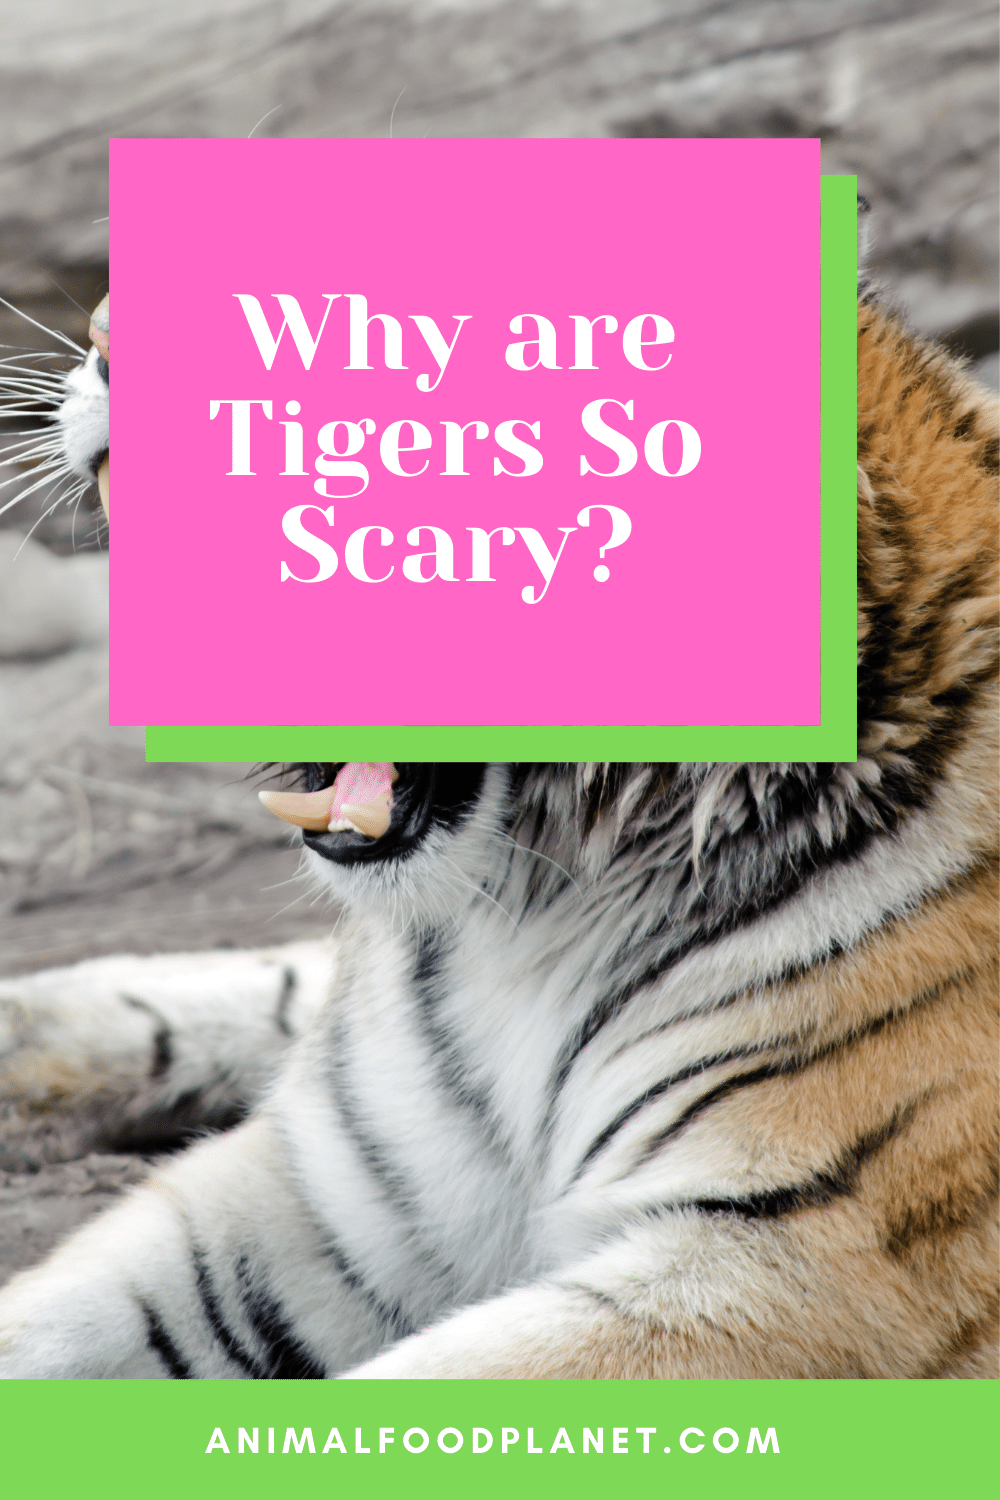 Why Are Tigers So Scary?